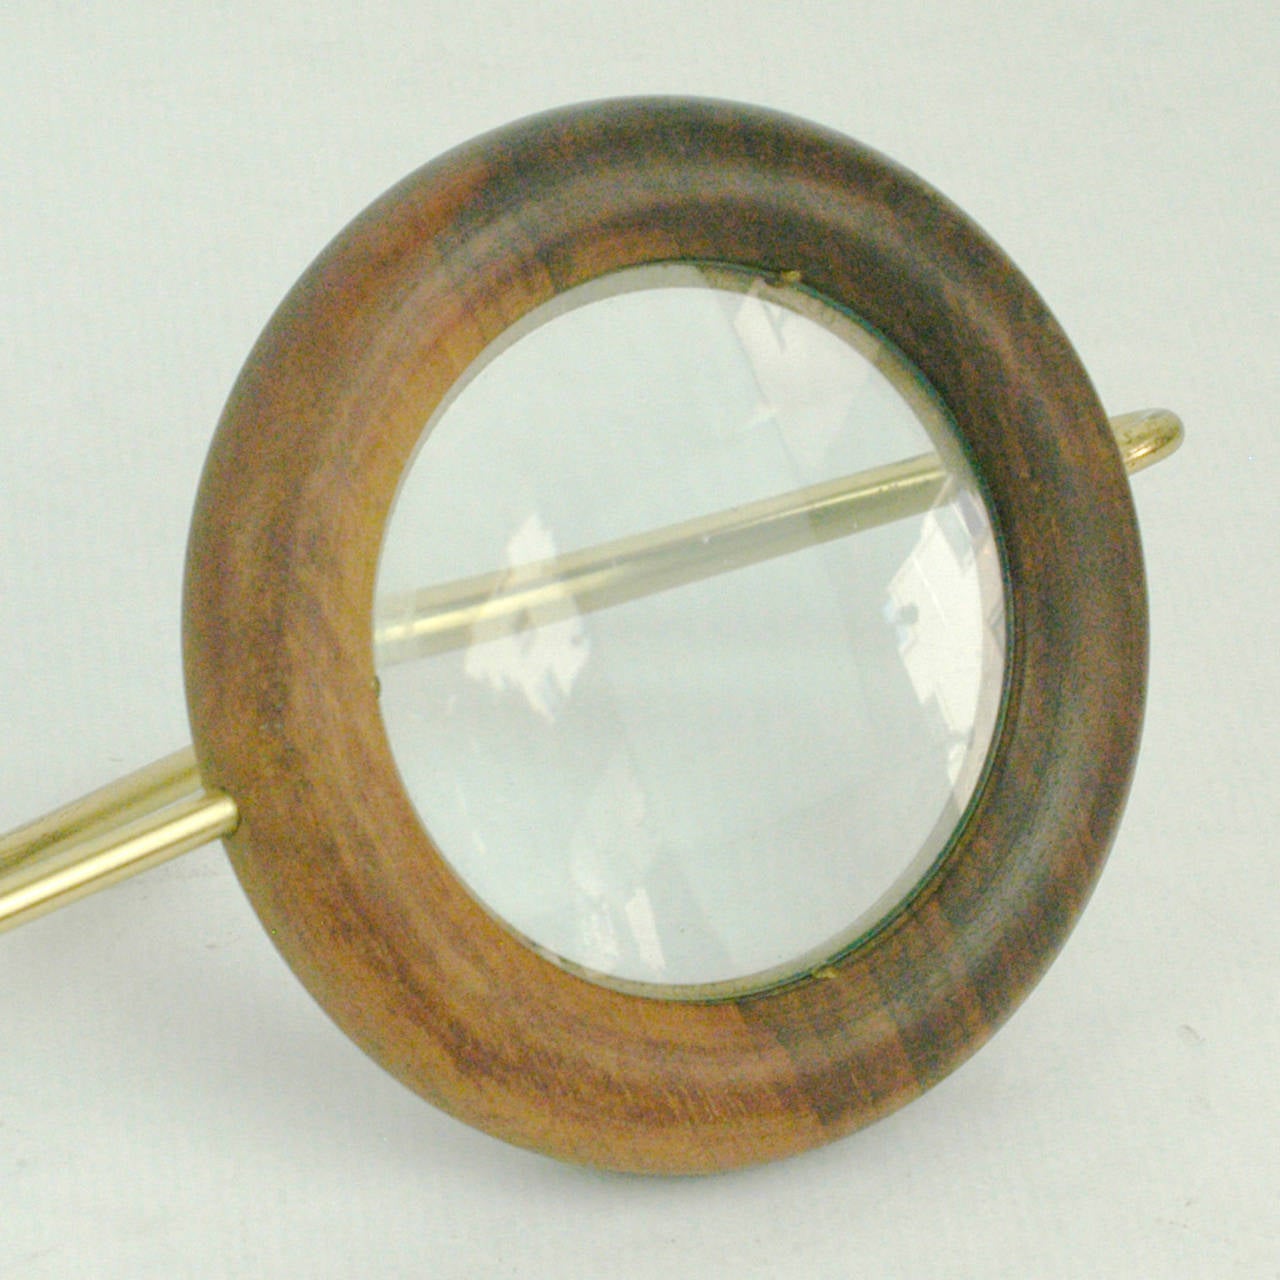 Polished brass and walnut magnifying glass, referring to sales catalog from the 1970s, Model no 5827